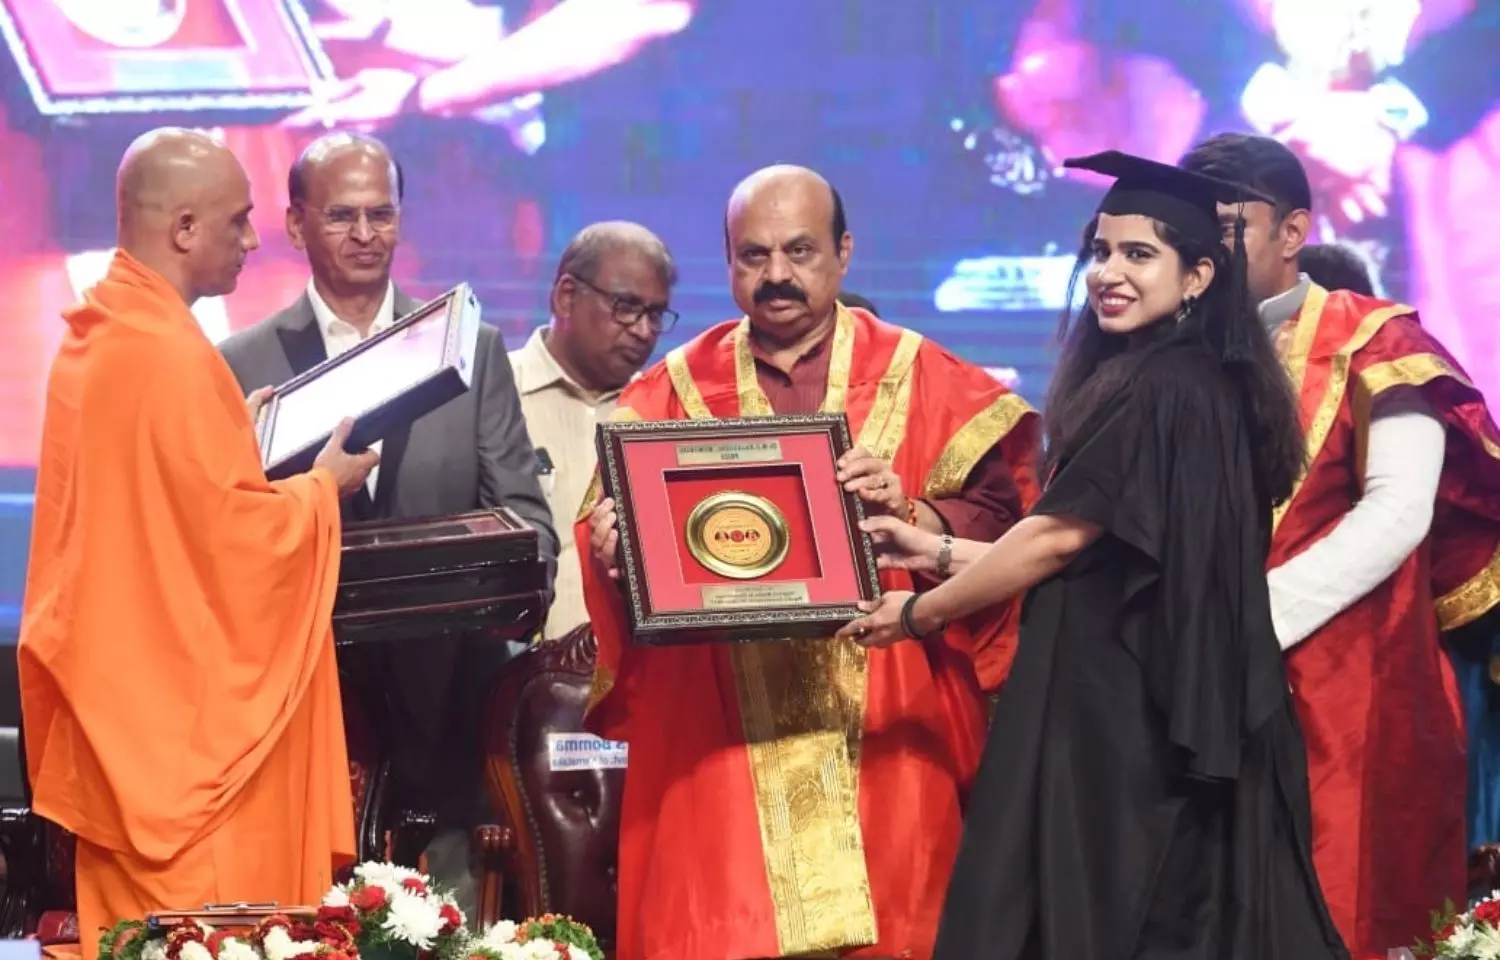 Dedicate your service to the people of India: Karnataka CM to doctors during convocation ceremony